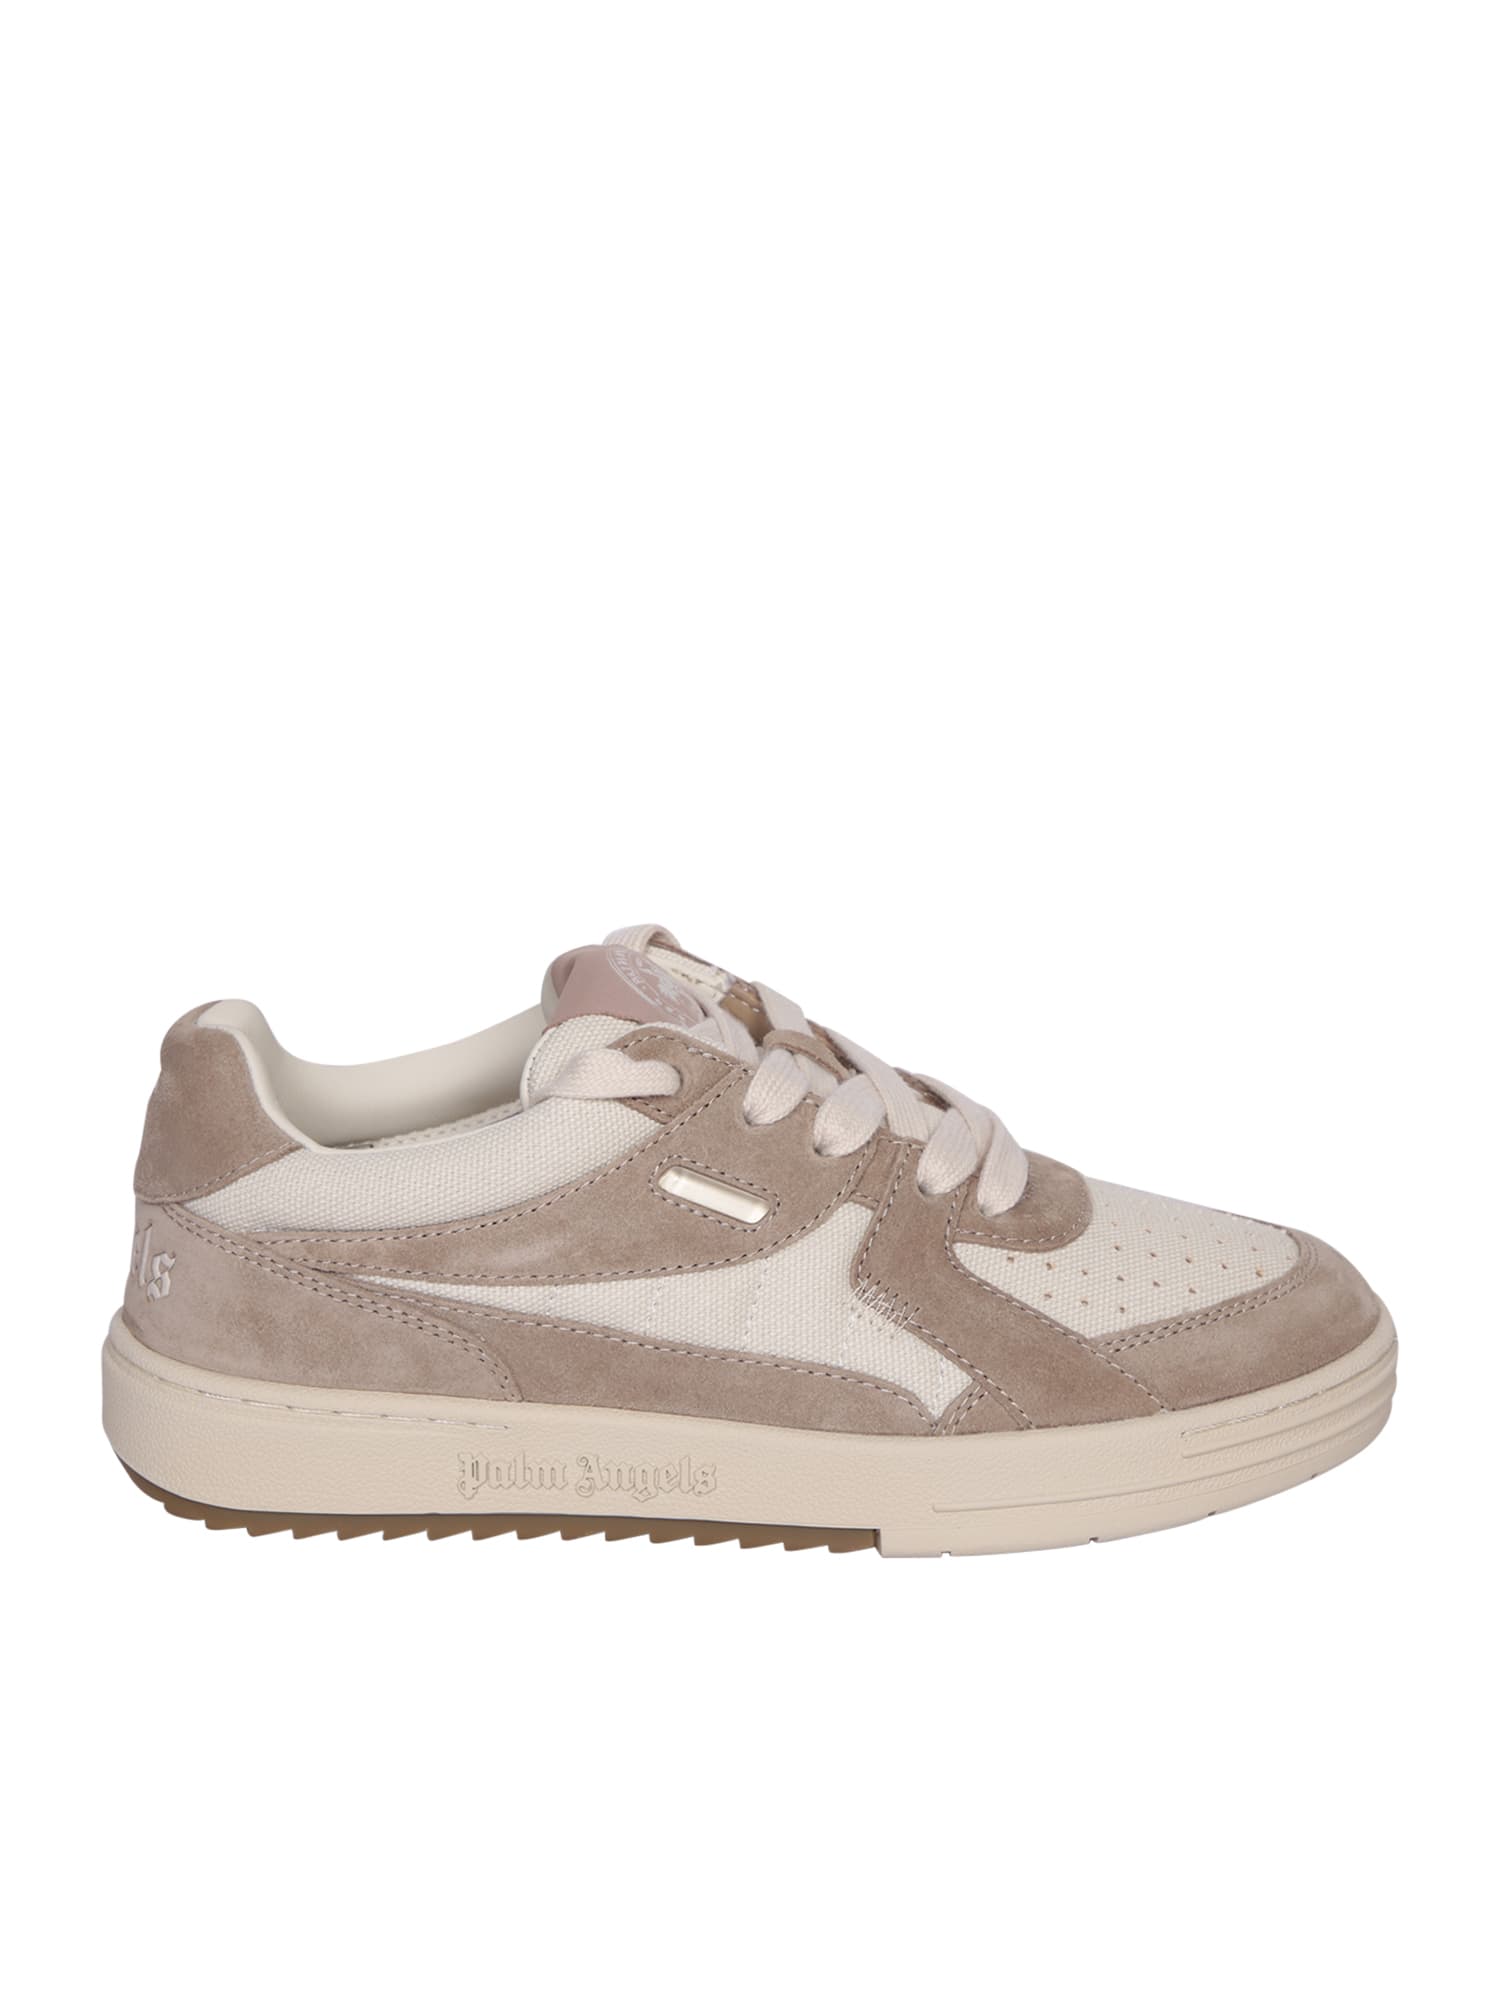 PALM ANGELS UNIVERSITY SUEDE SNEAKERS